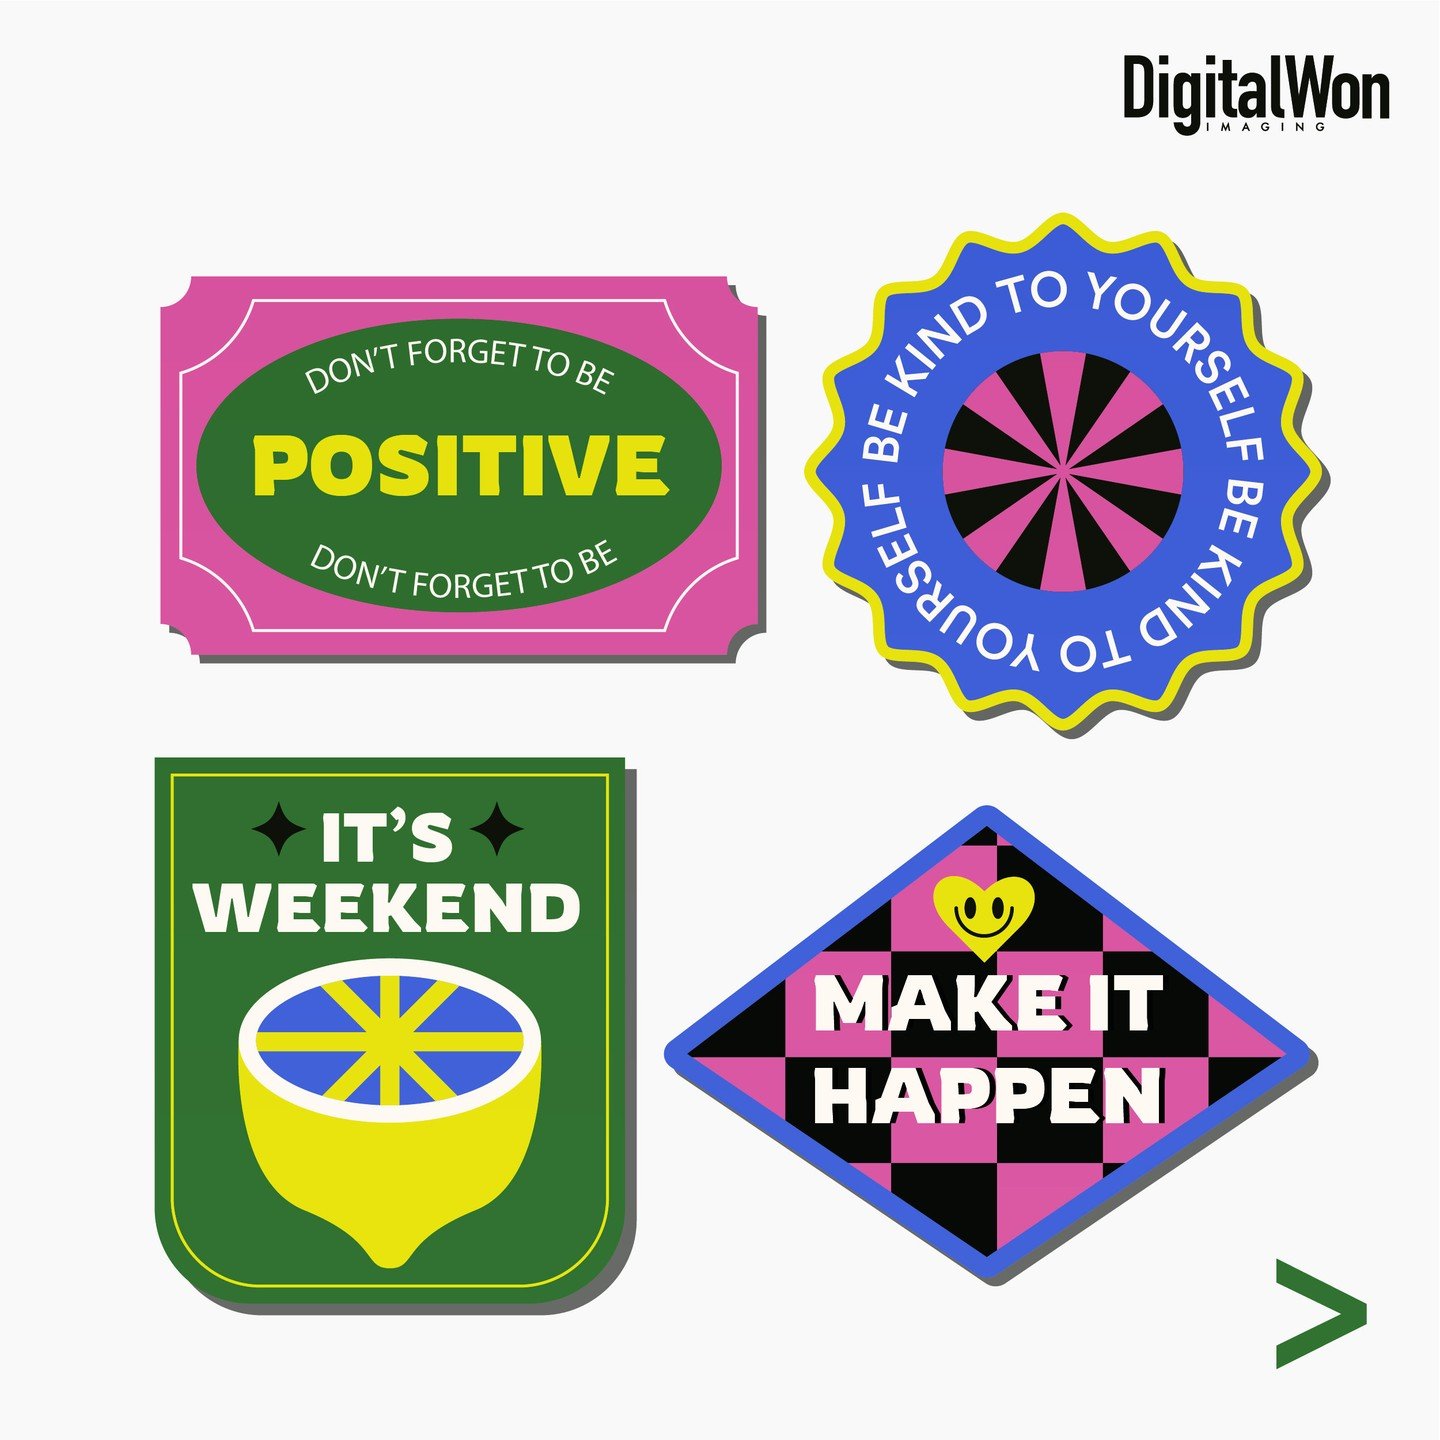 Looking to add a pop of color and personality to your home, office, or as a unique gift? Check out our latest collection of fun and versatile stickers! 🎨

Can't find the perfect design? No problem! Our team of talented graphic designers is ready to 